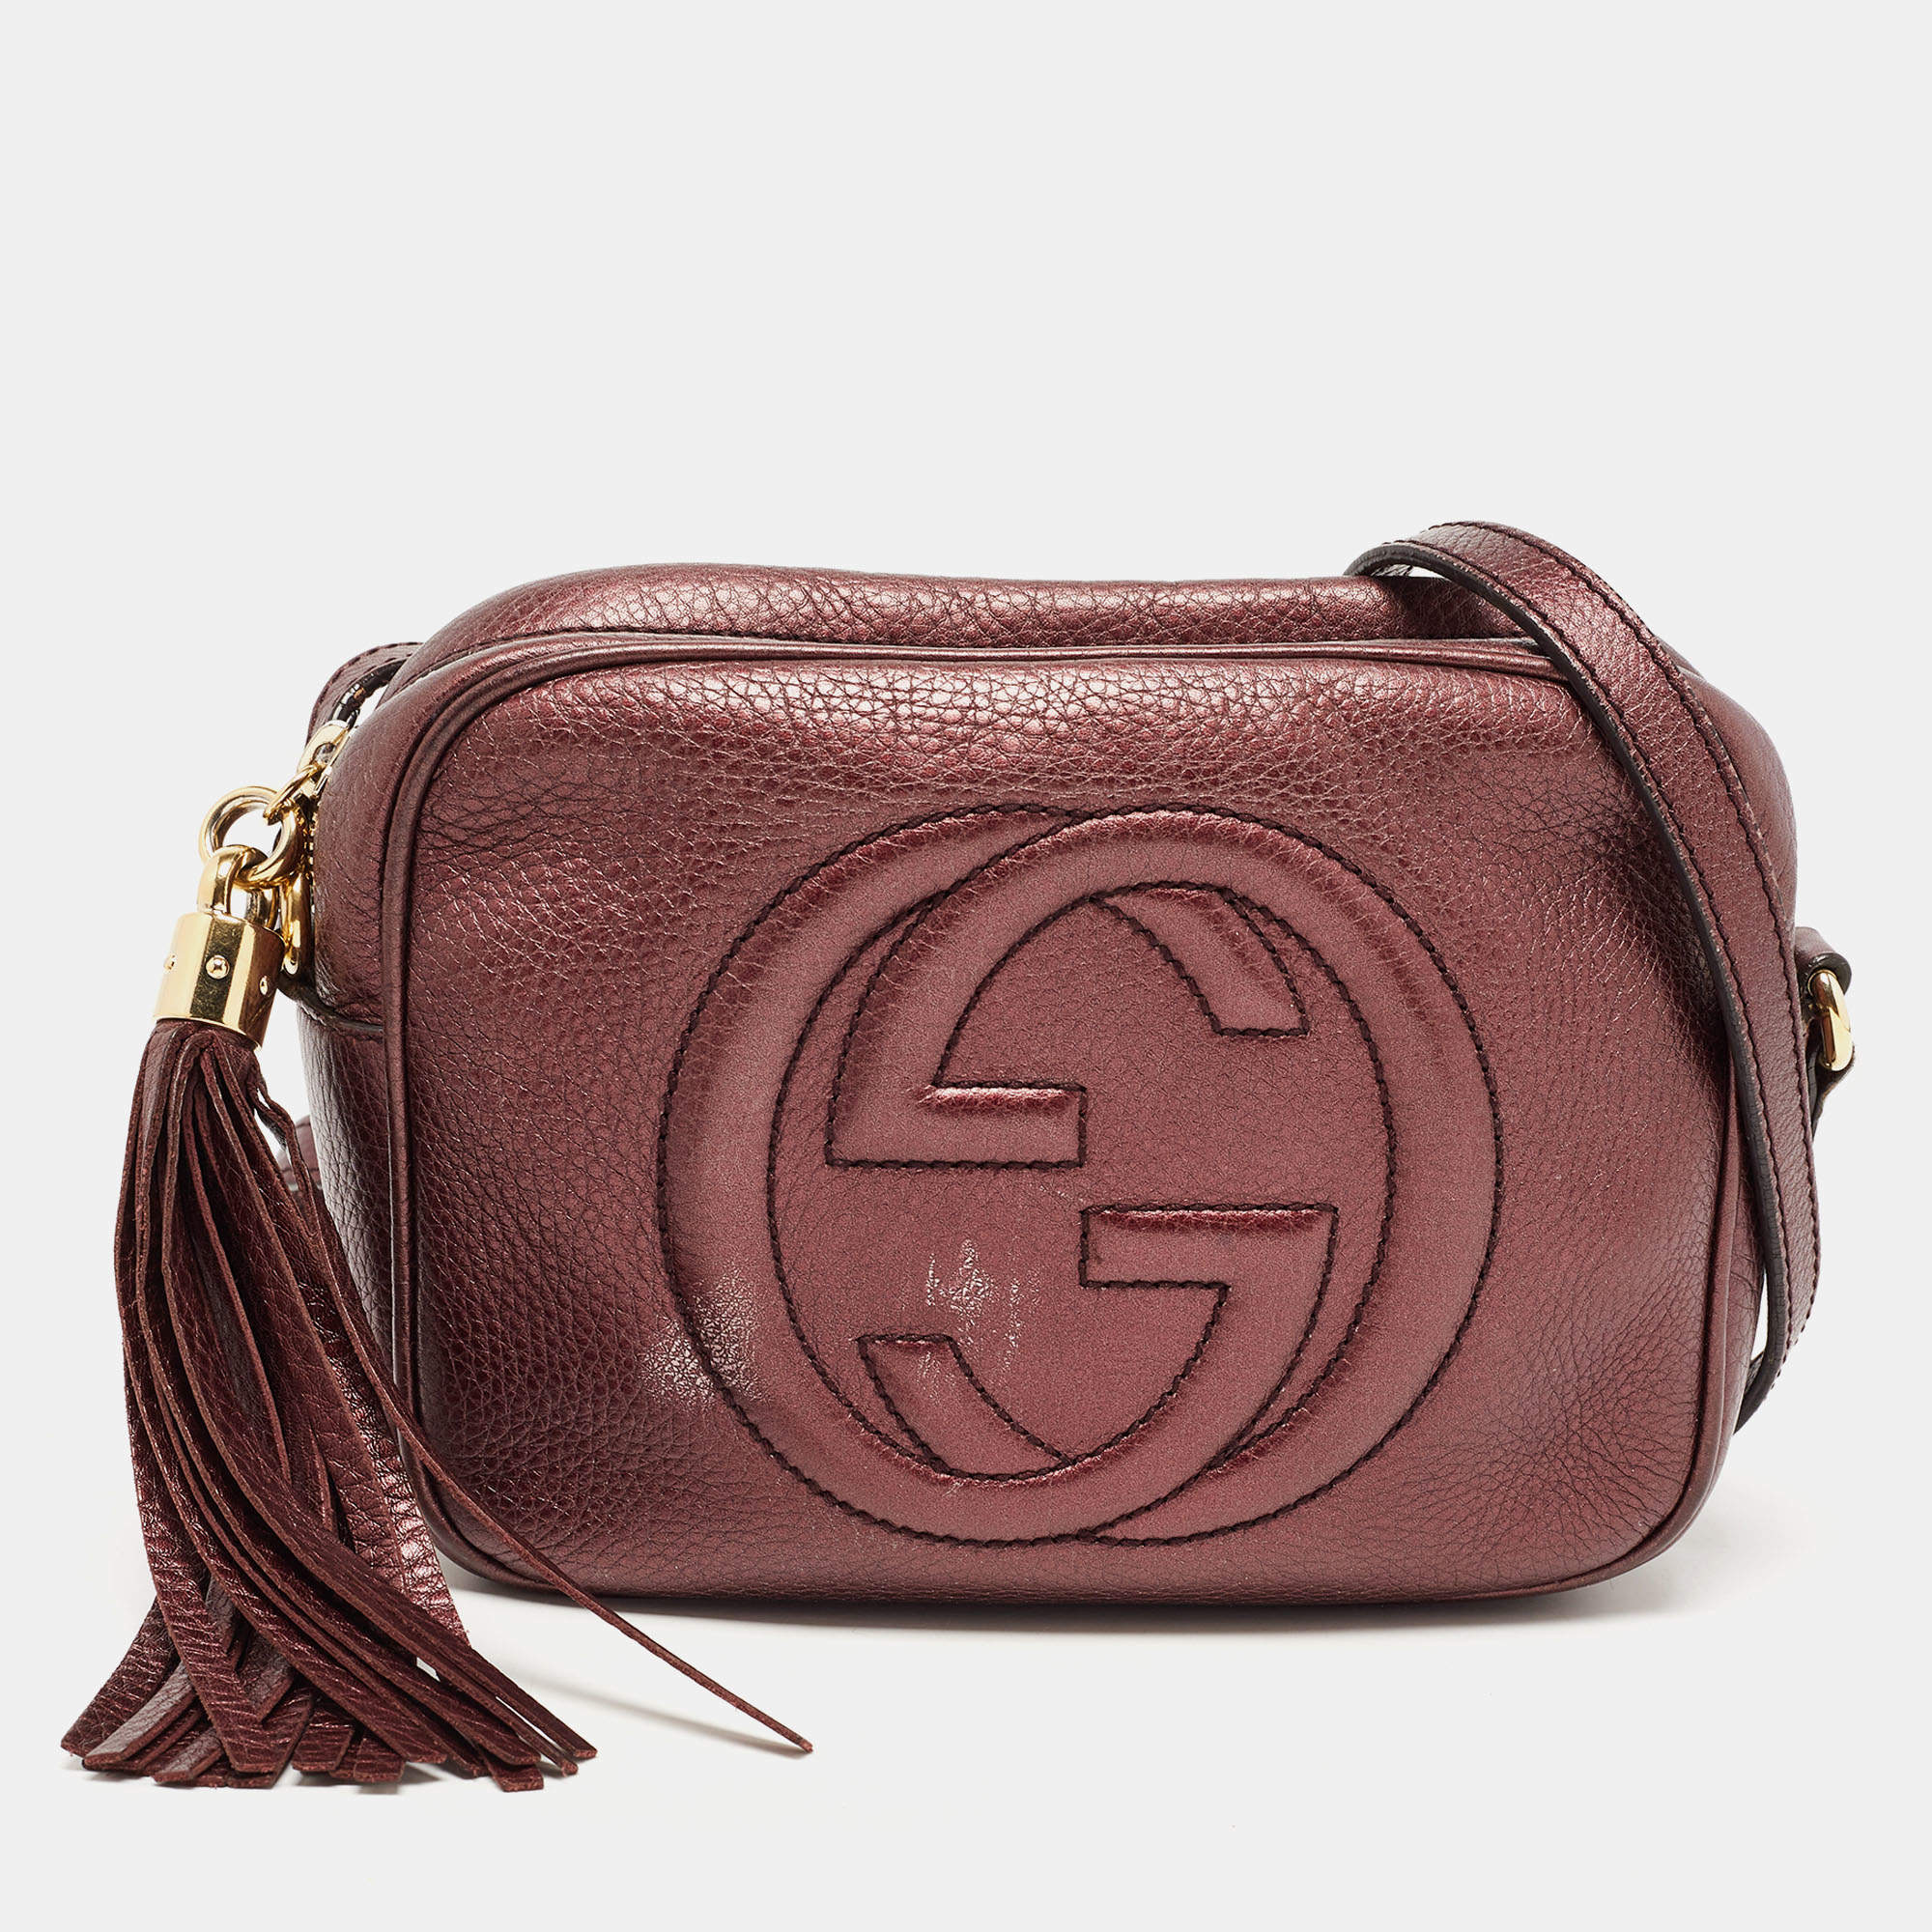 Gucci Soho Chain Flap Leather Crossbody Bag in Brown